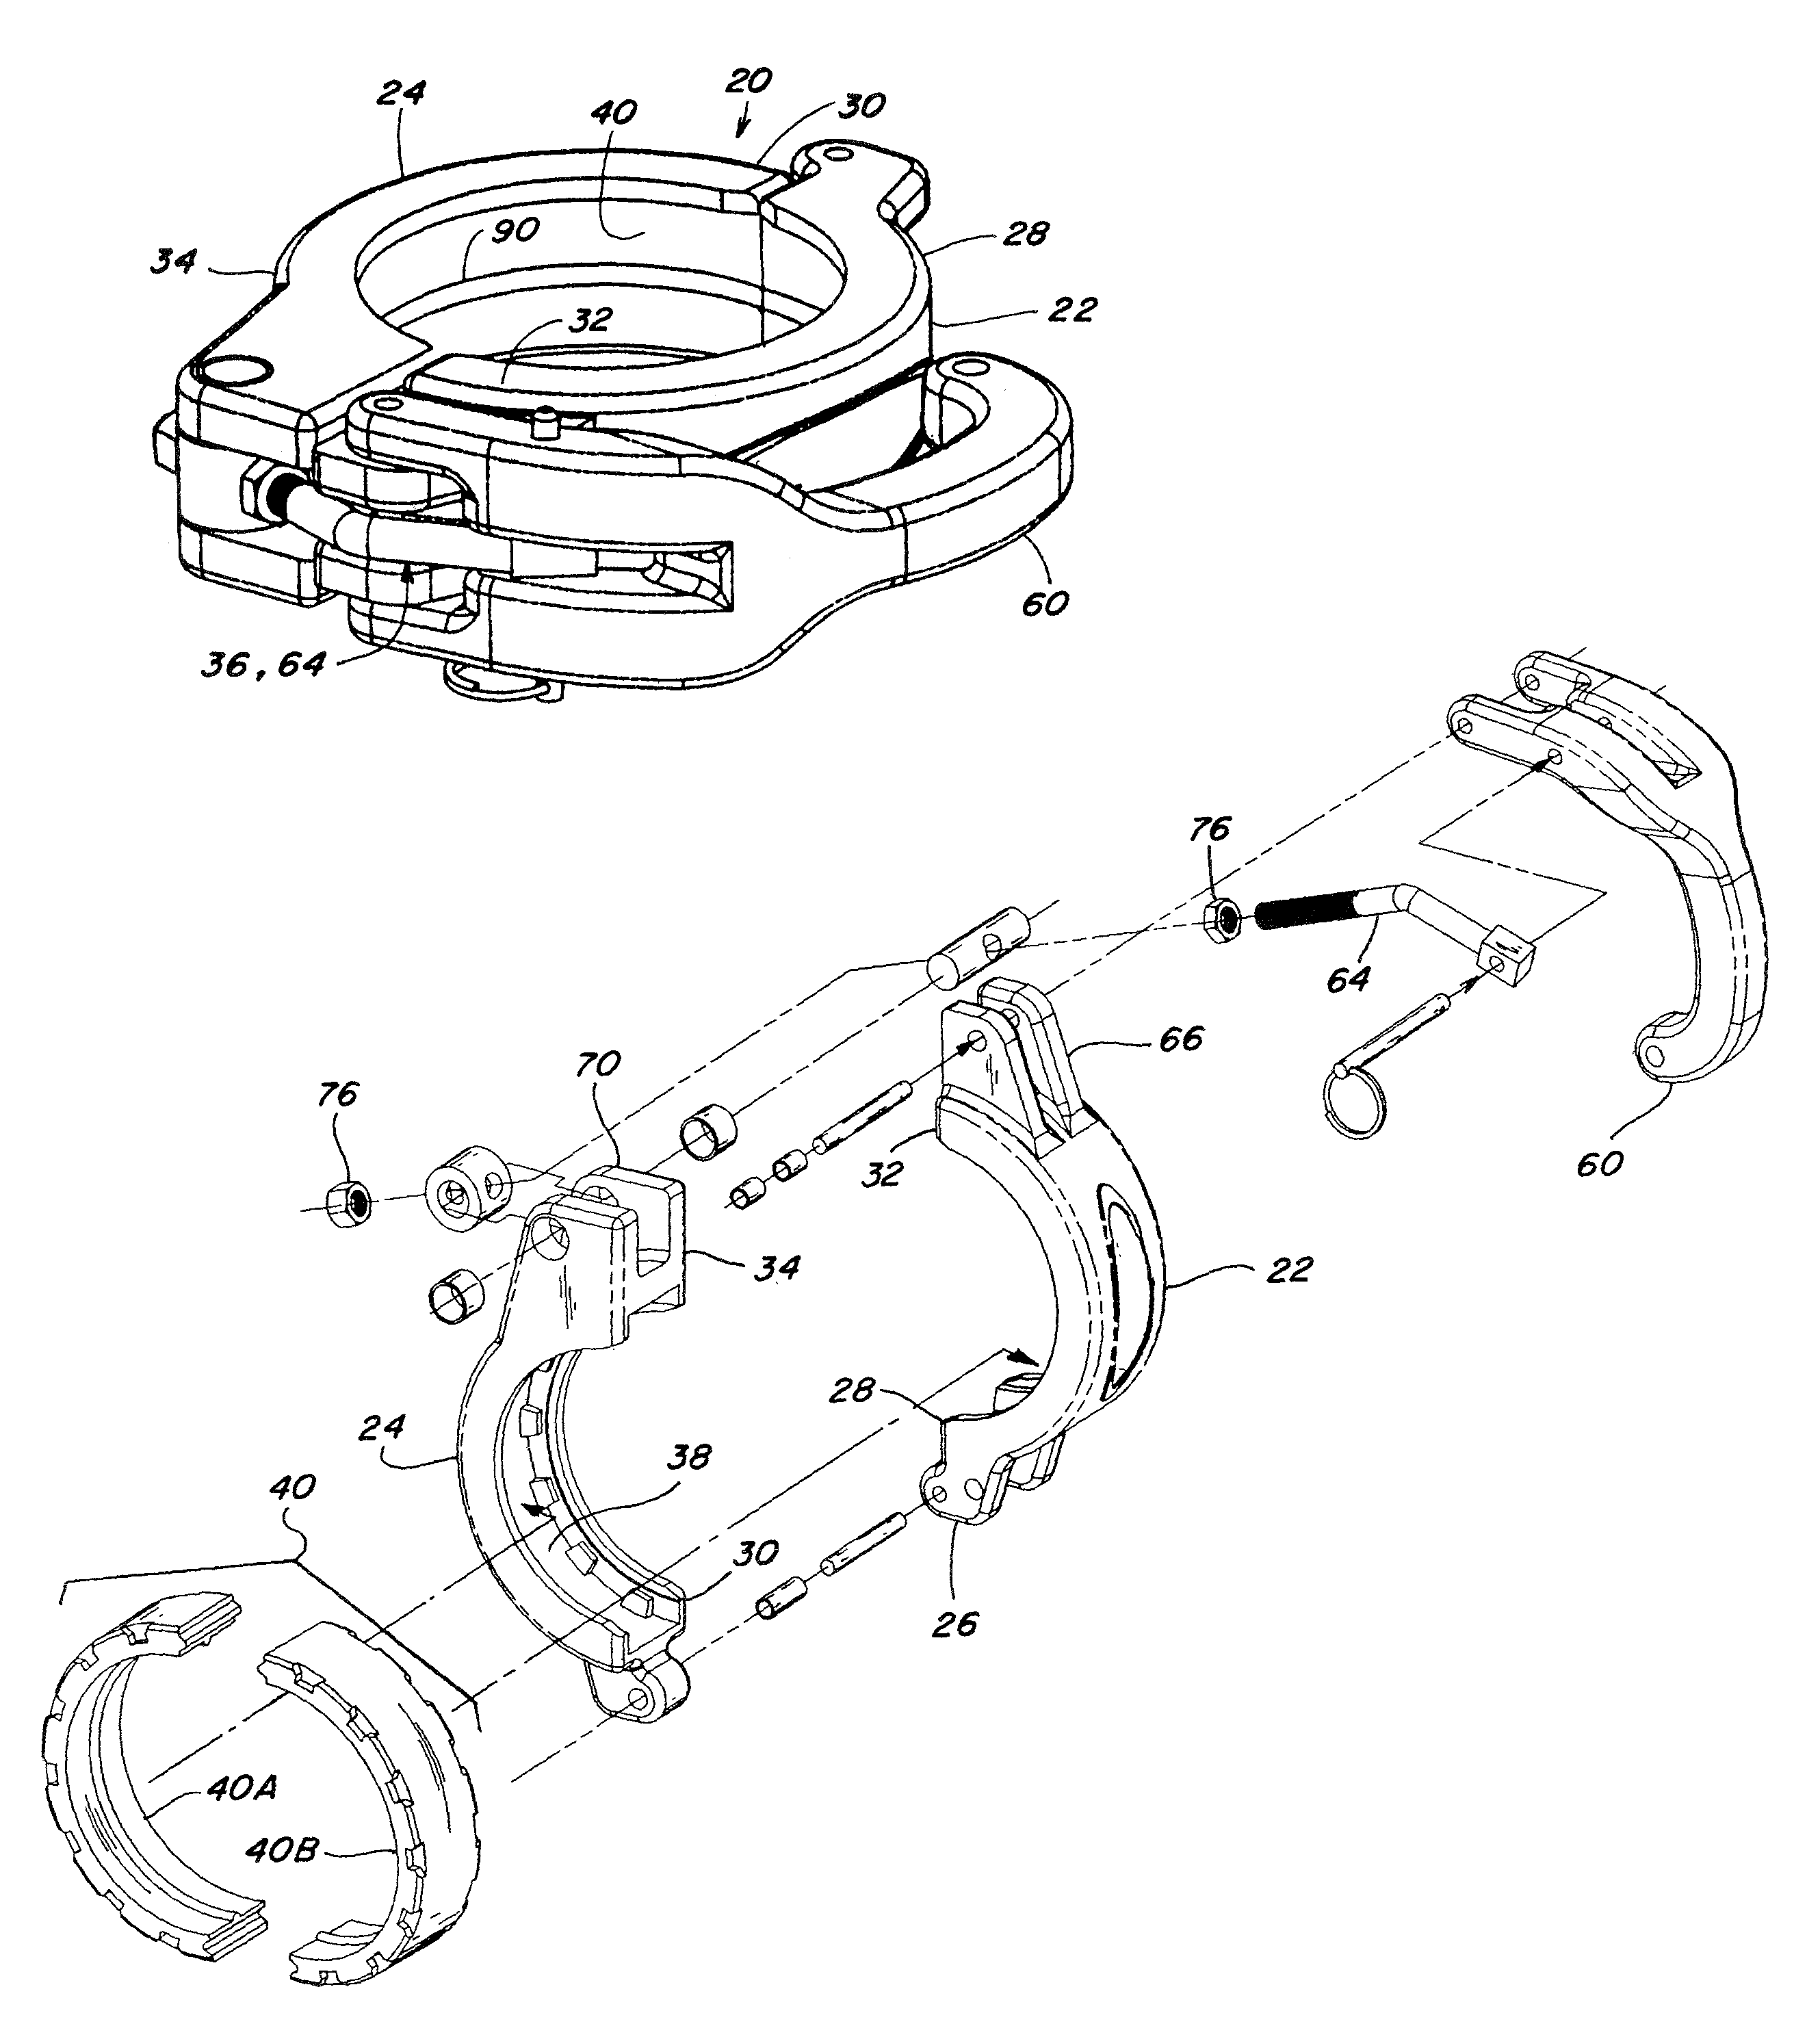 Pipe coupler and gasket with positive retention and sealing capability